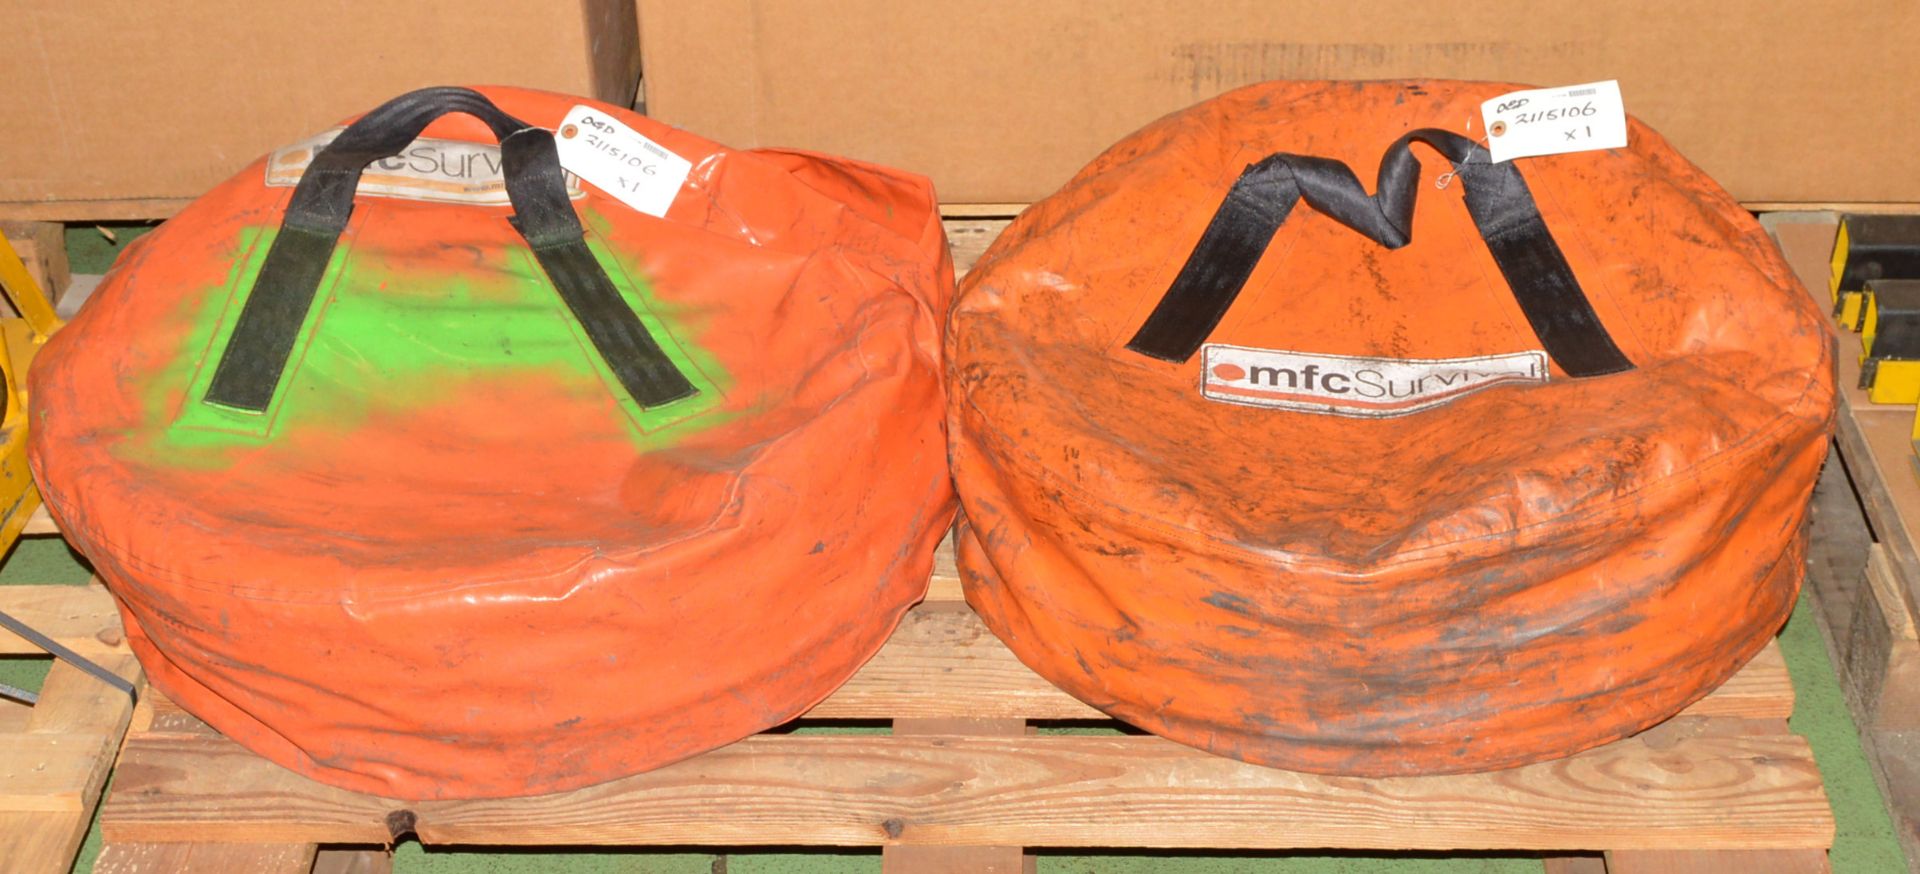 2x MFC Survival Airbags & Hoses.